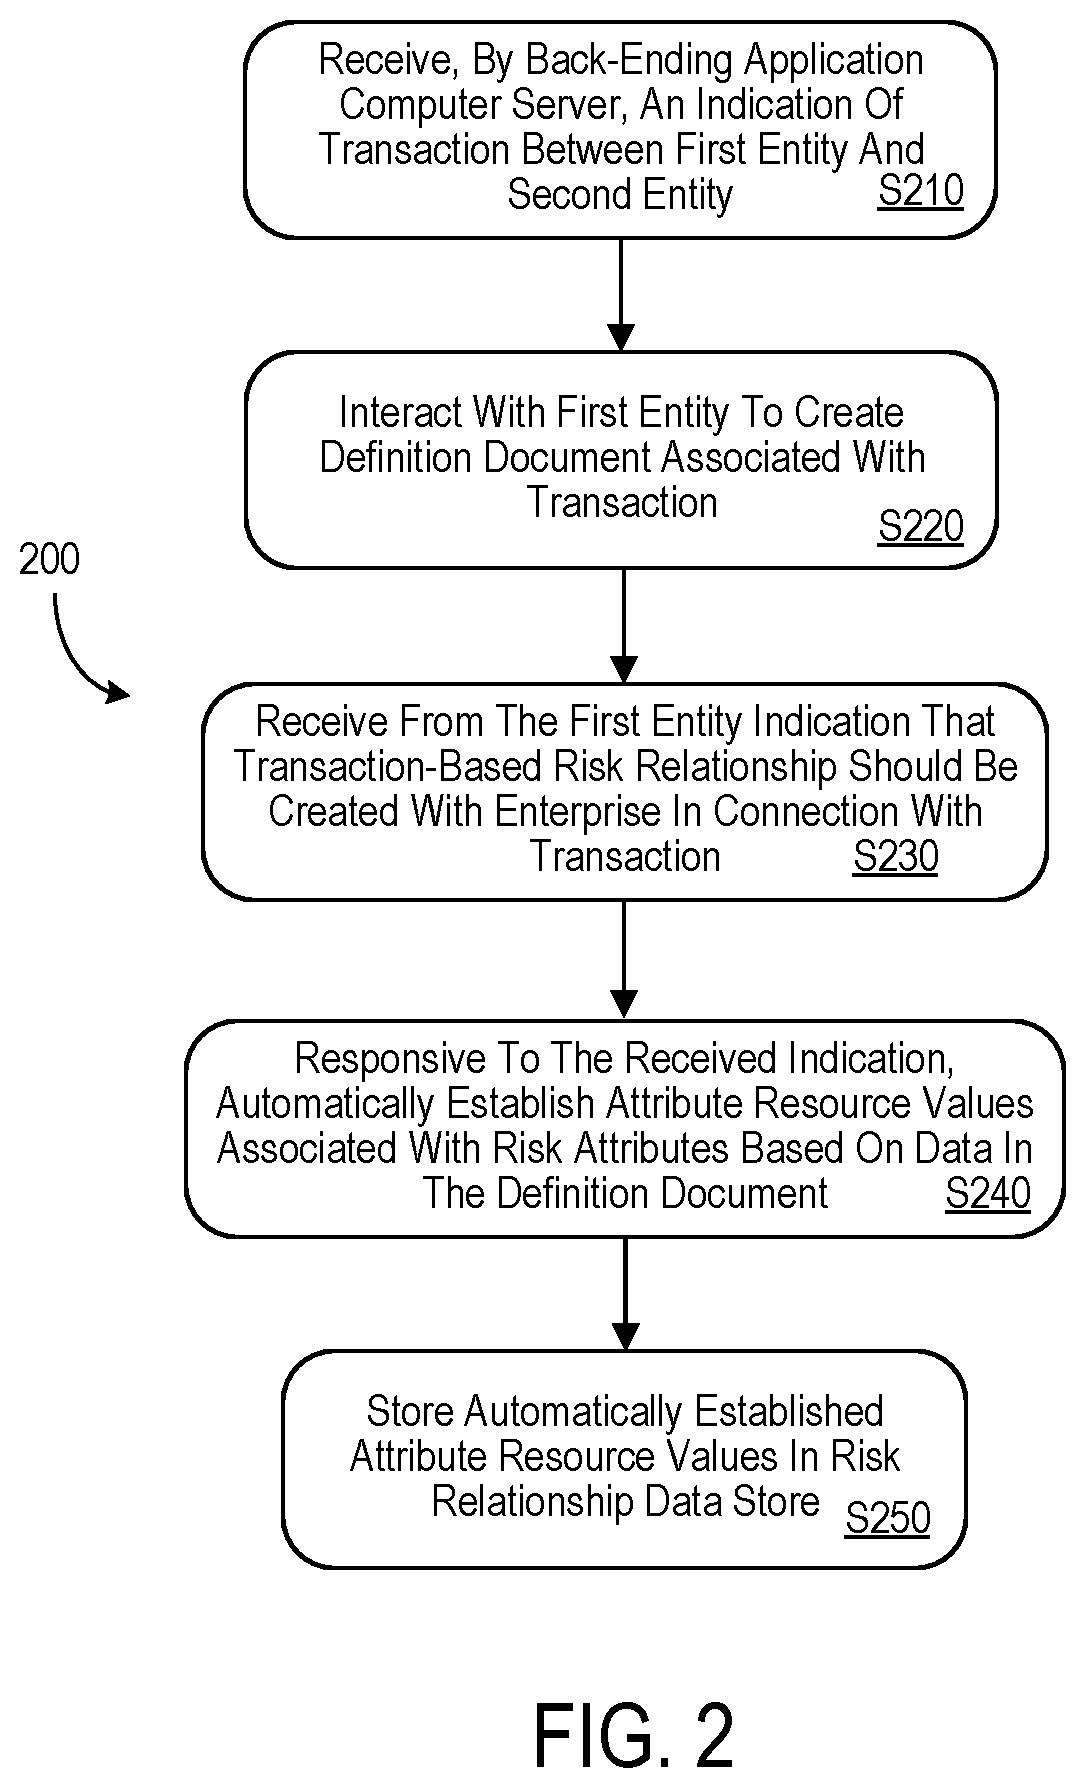 System and method to automate transaction-based risk assignment